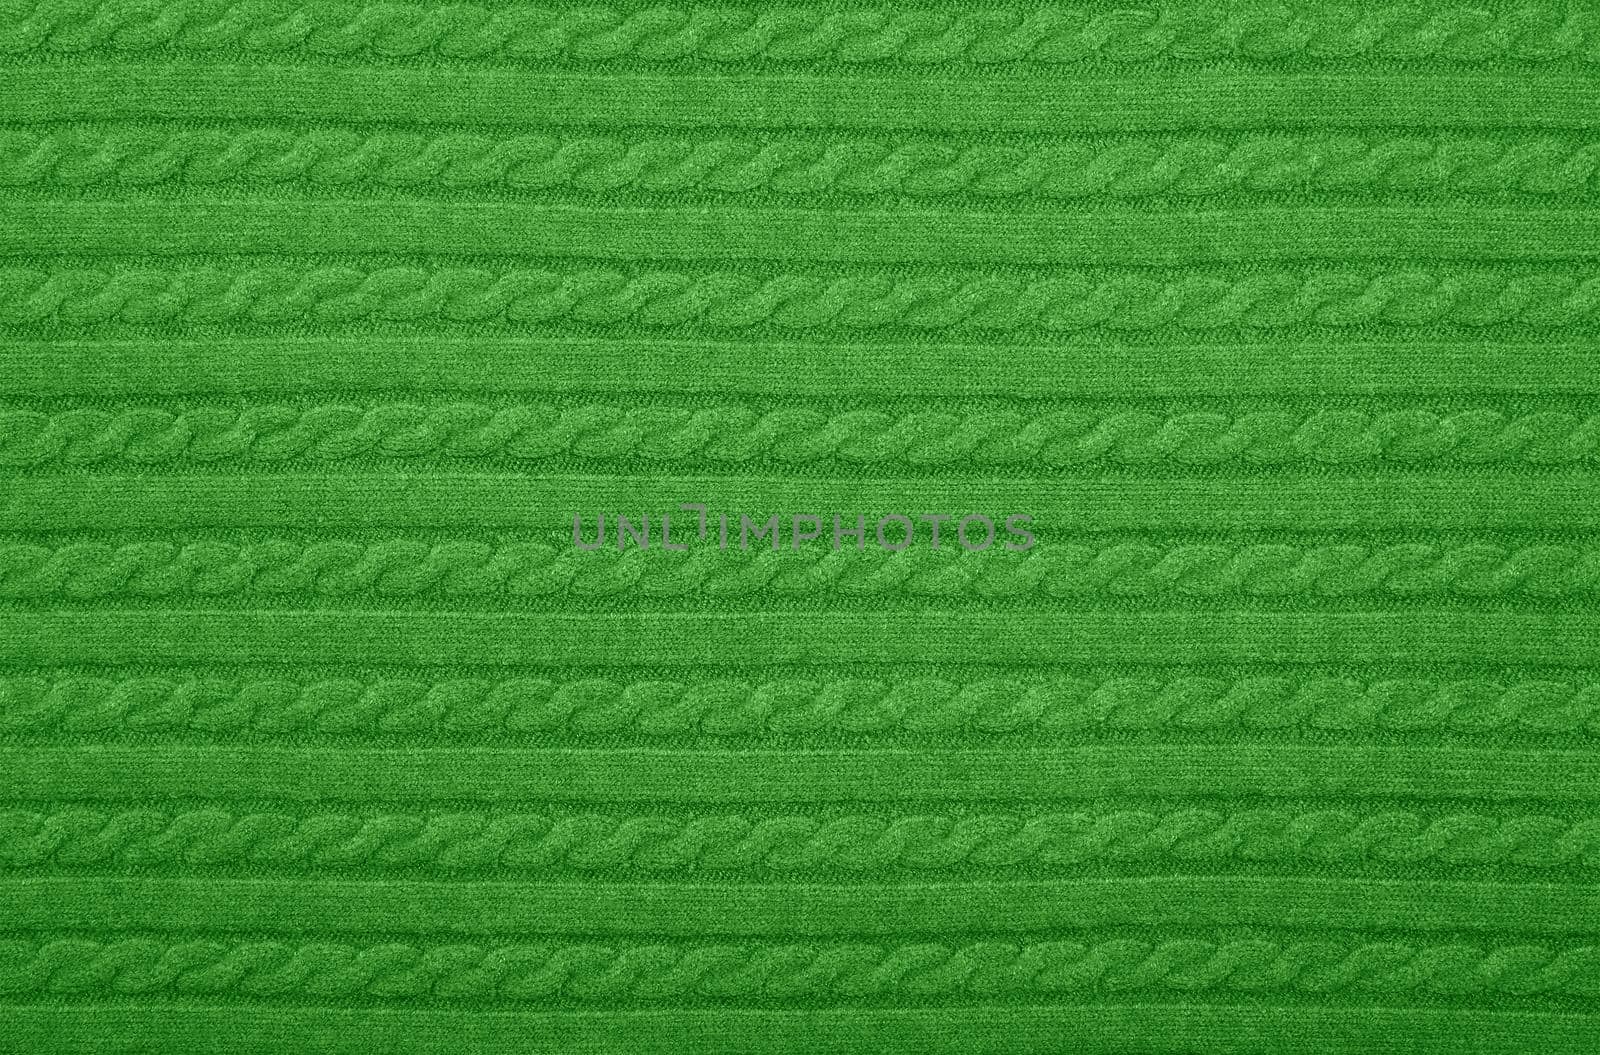 Close up background texture of green cable knitted wool jersey fabric sweater with row braid pattern